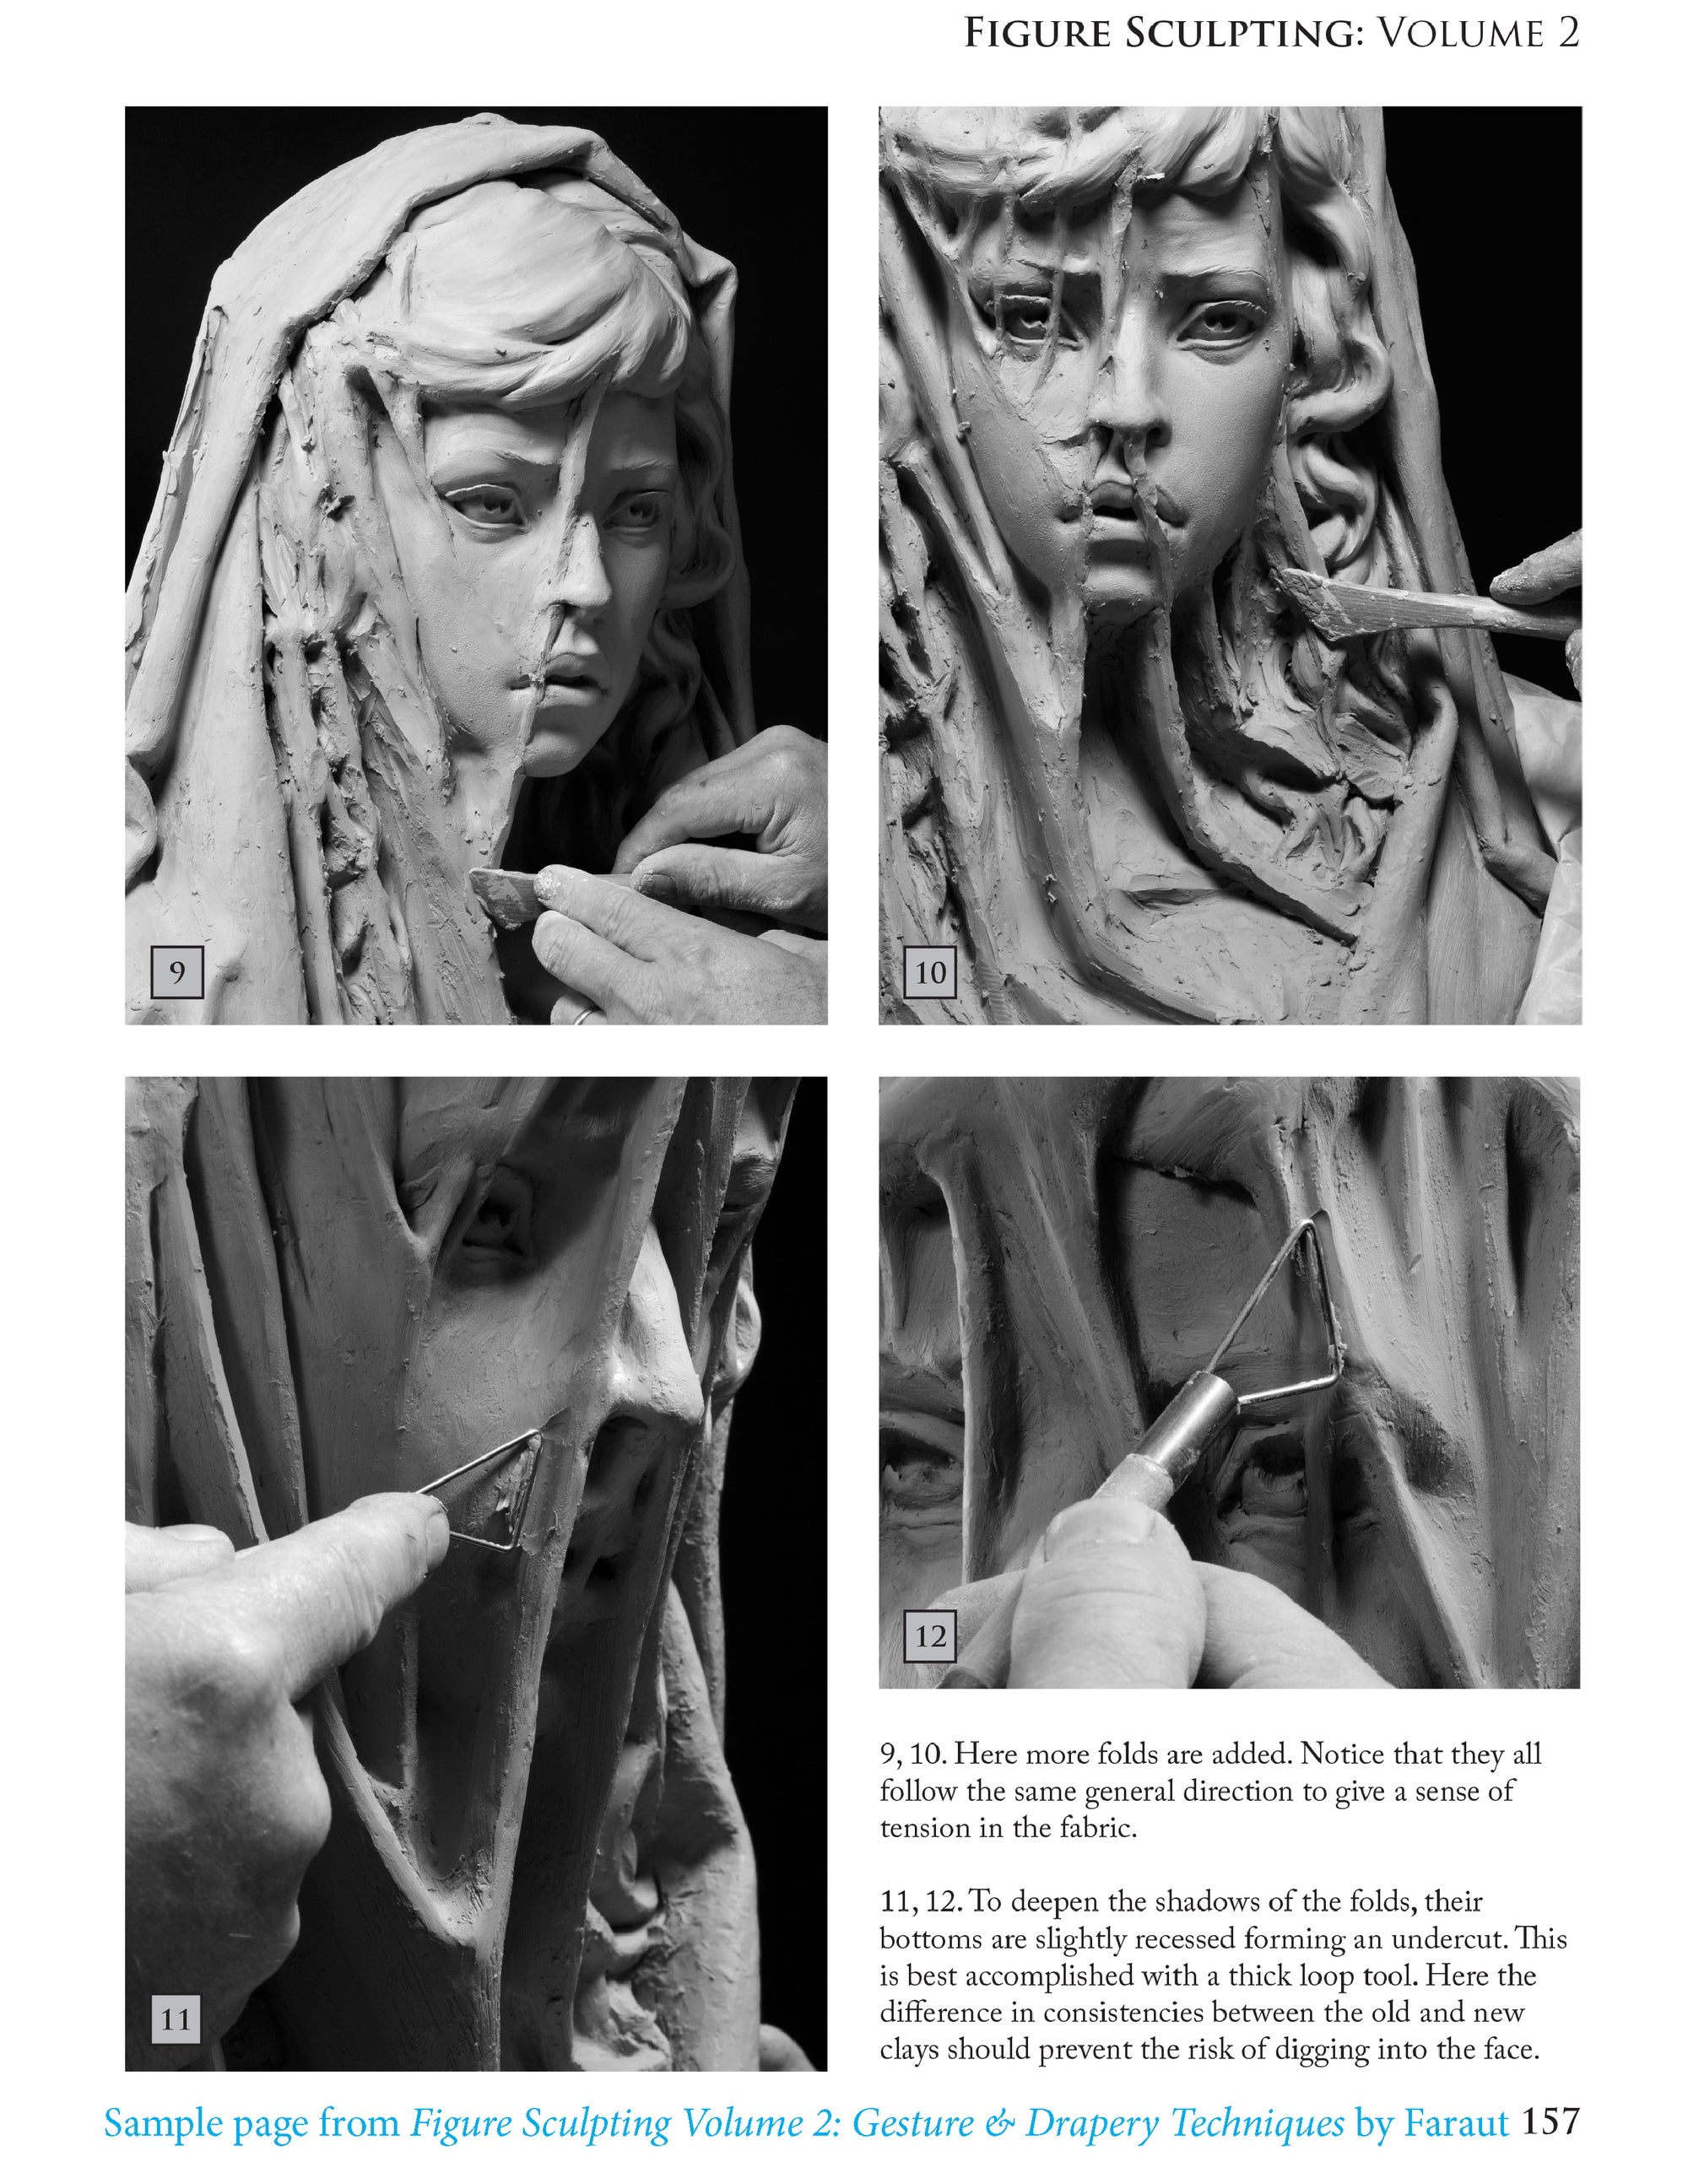  Sample page from book: Figure Sculpting Volume 2 by Faraut showing how to sculpt translucent fabric